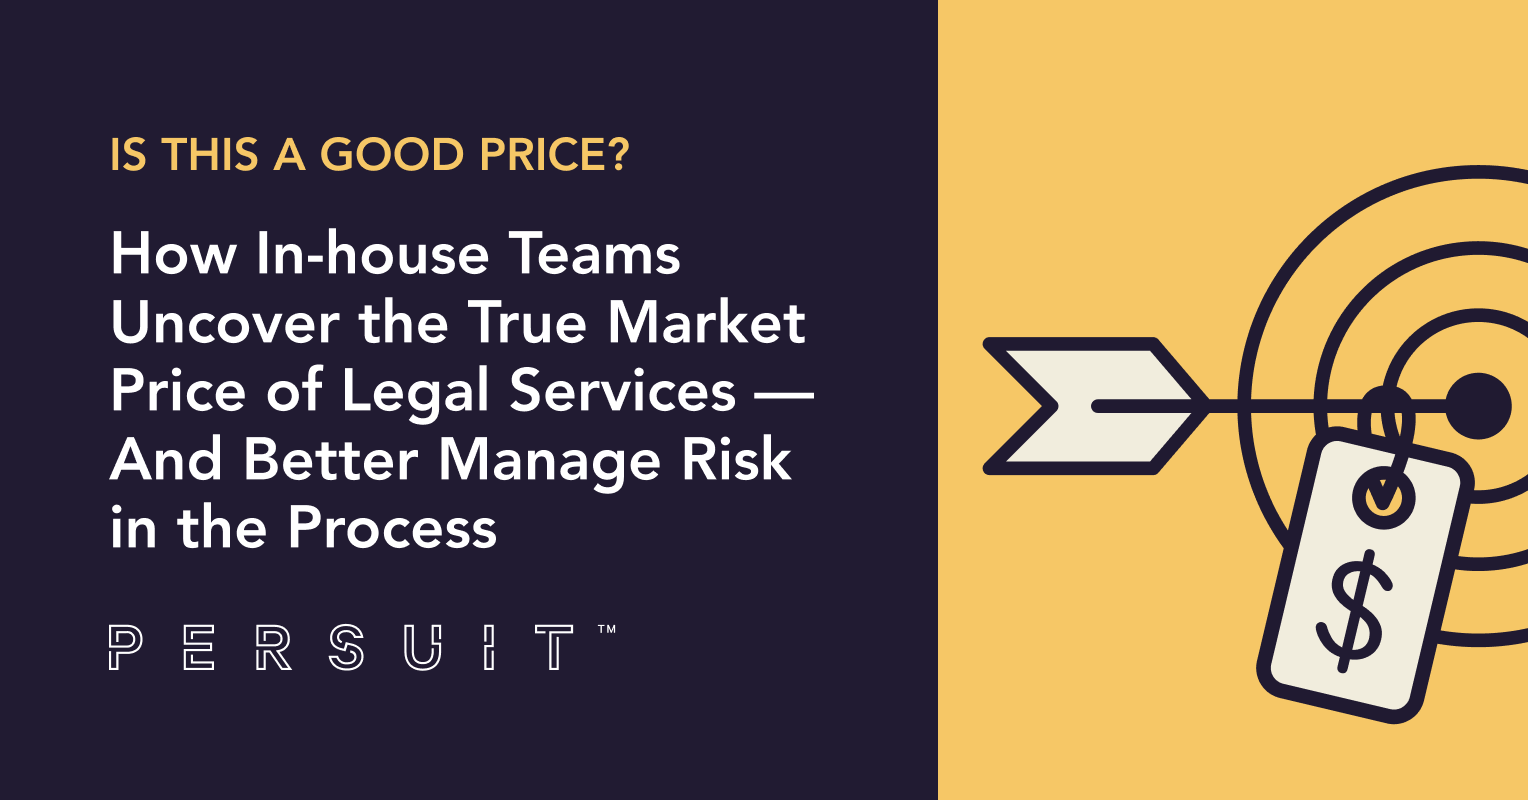 Is This a Good Price? How In-house Teams Uncover the True Market Price of Legal Services — And Better Manage Risk in the Process